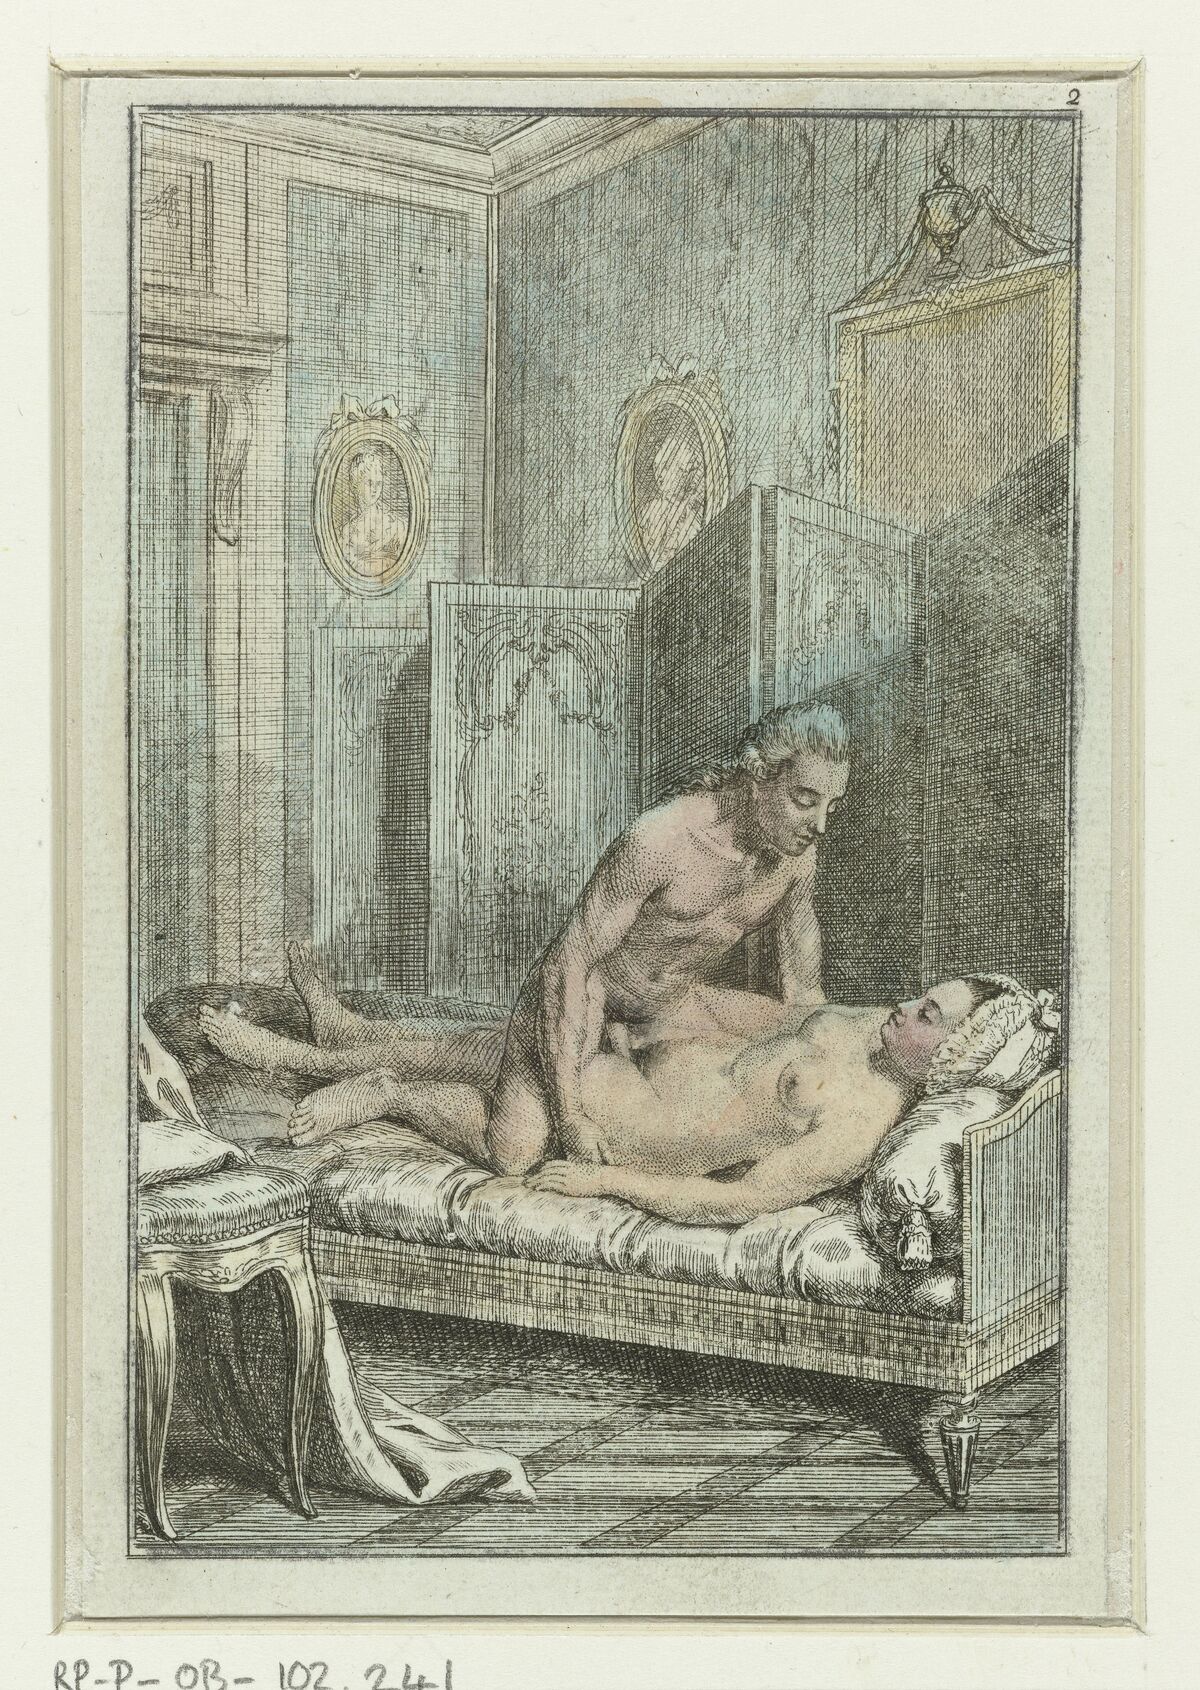 Anonymous, Erotic Series with Couples in Bed, ca. 1750–1800. Courtesy of the Rijksmuseum.